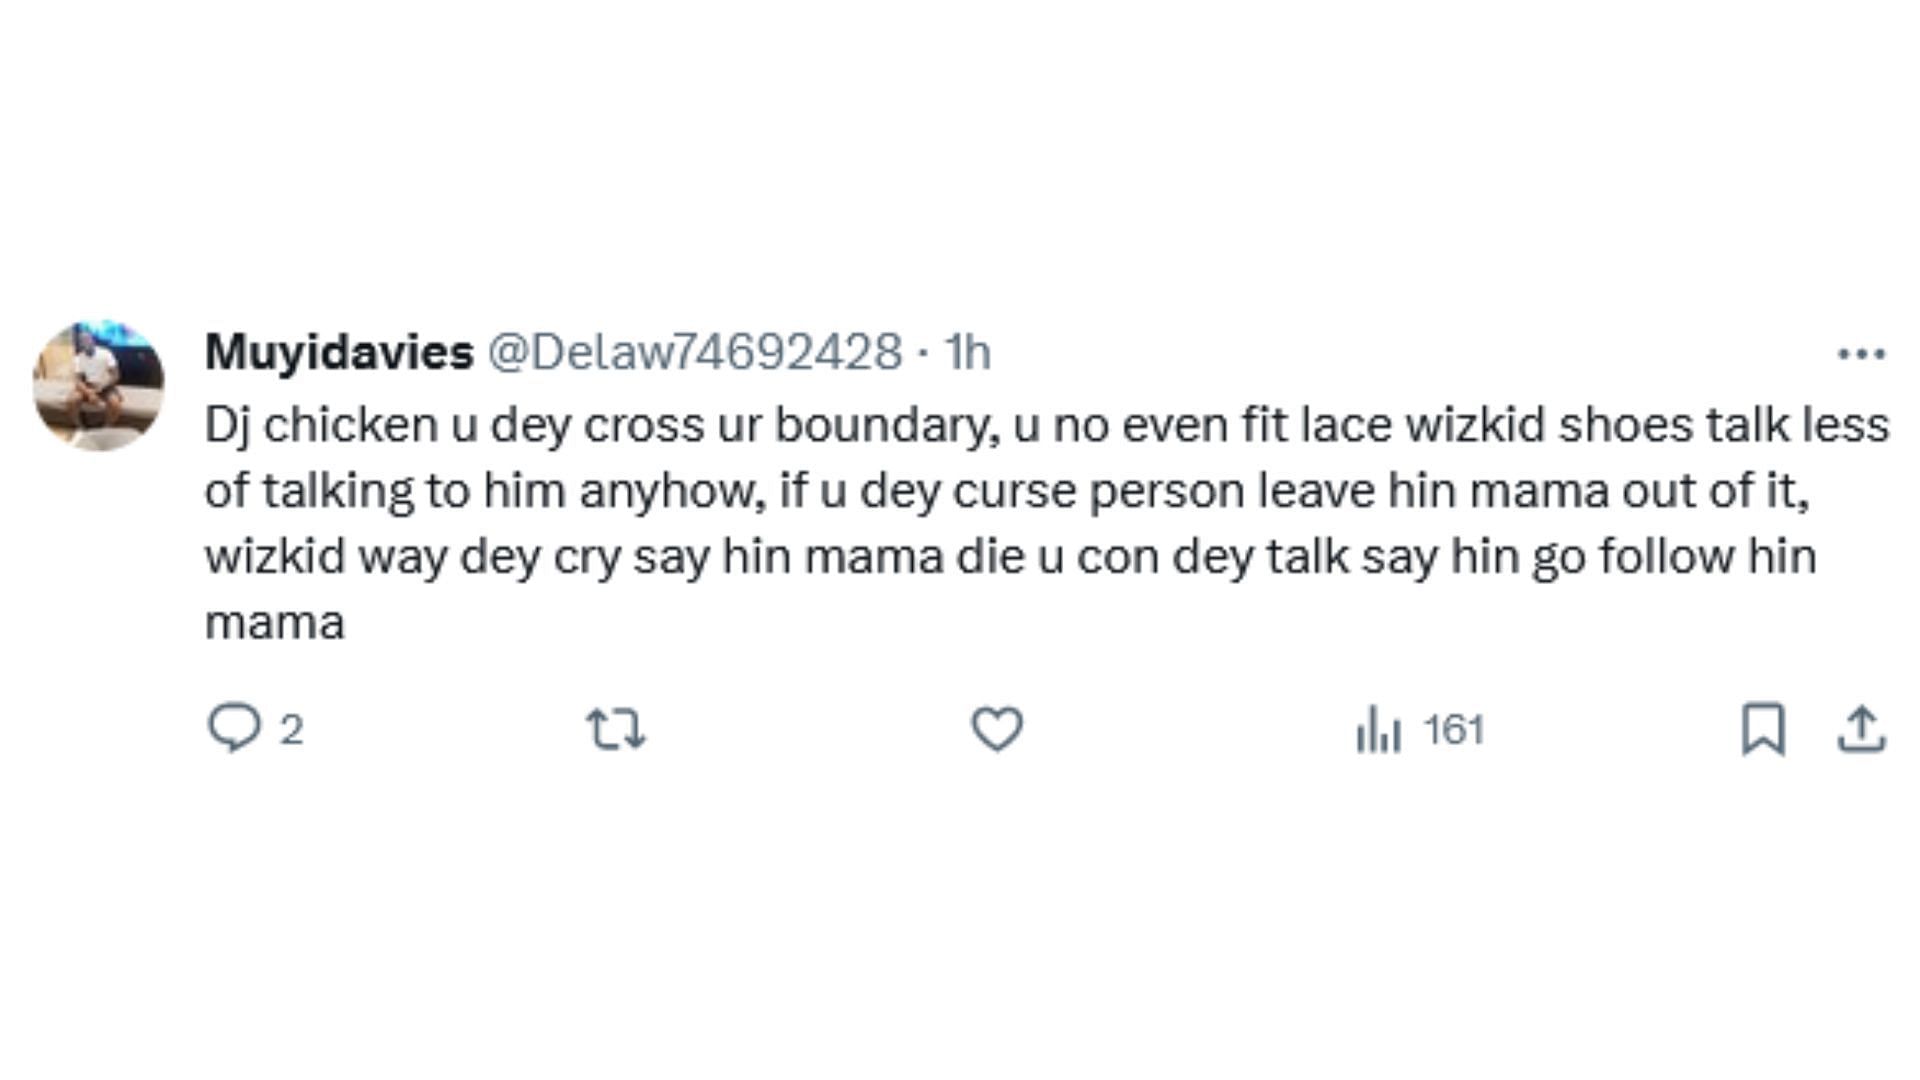 X users react as the Nigerian social media sensation said mean things about Wizkid&#039;s mother (Image via X / @Delaw74692428)